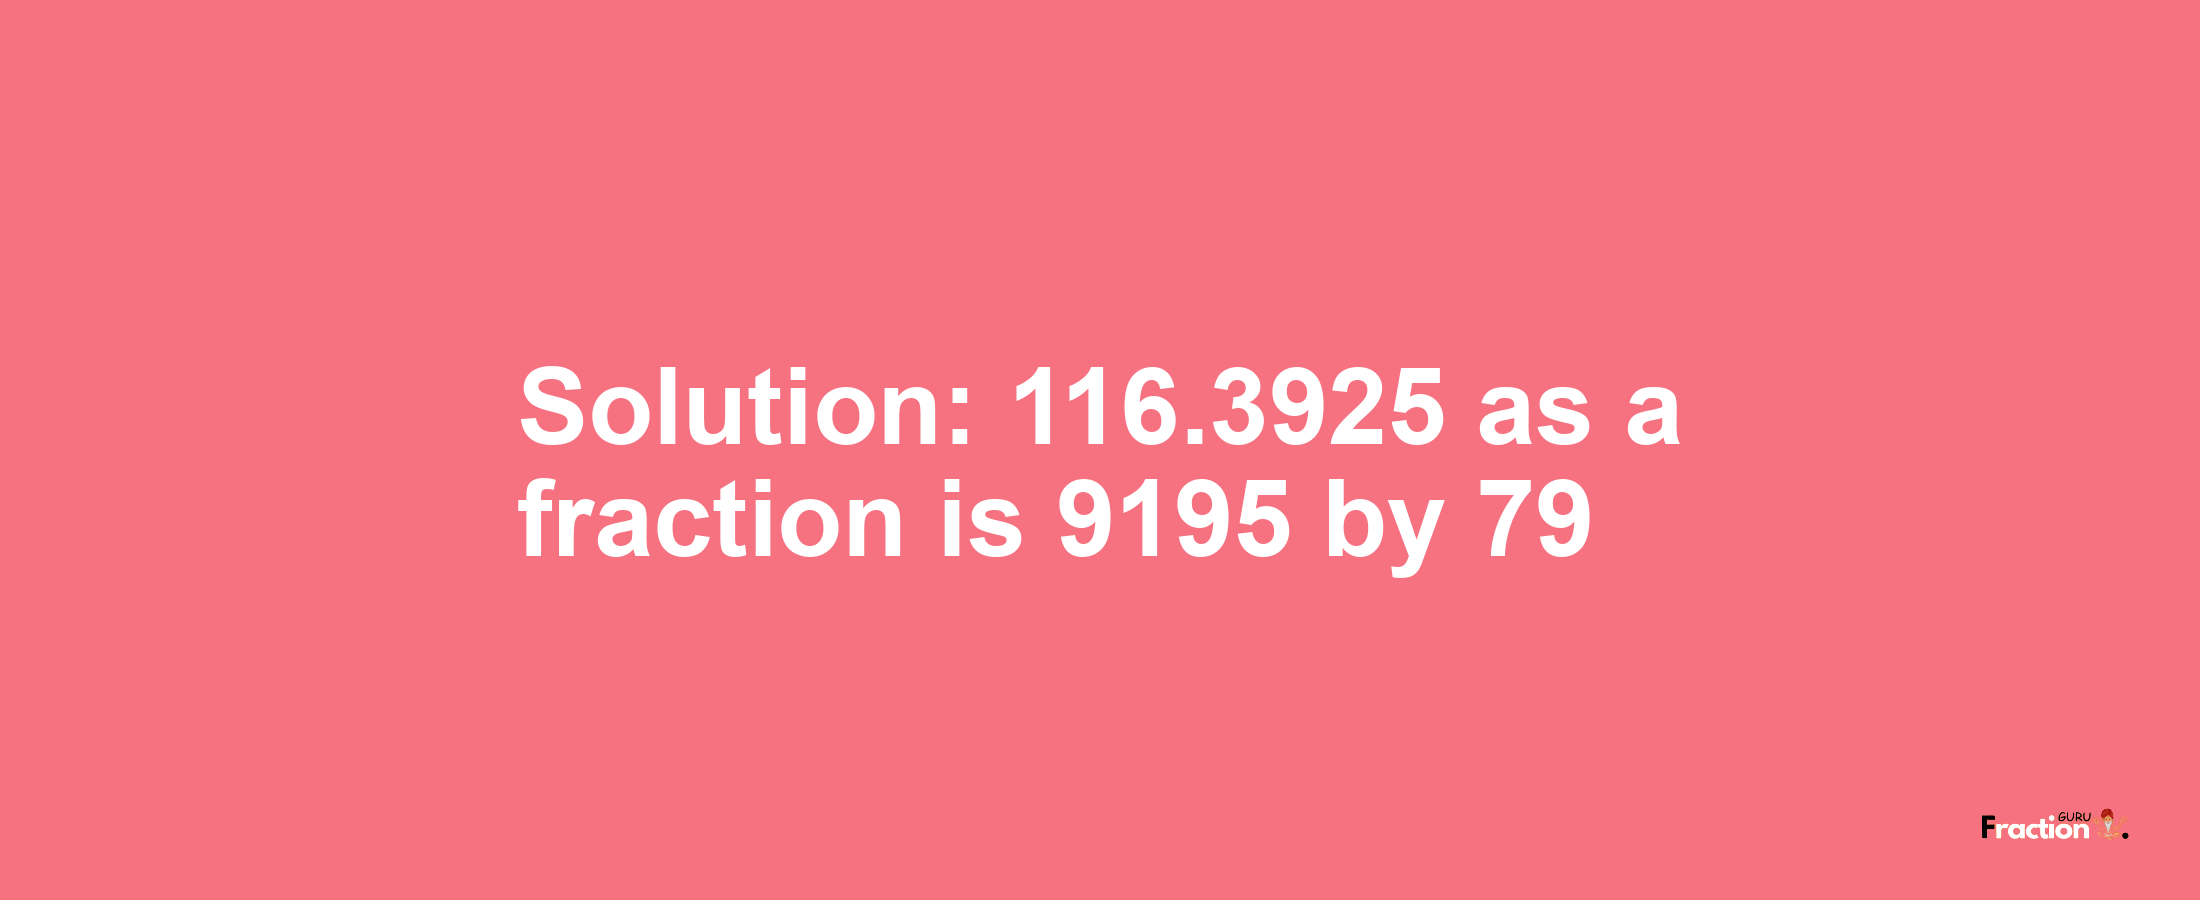 Solution:116.3925 as a fraction is 9195/79